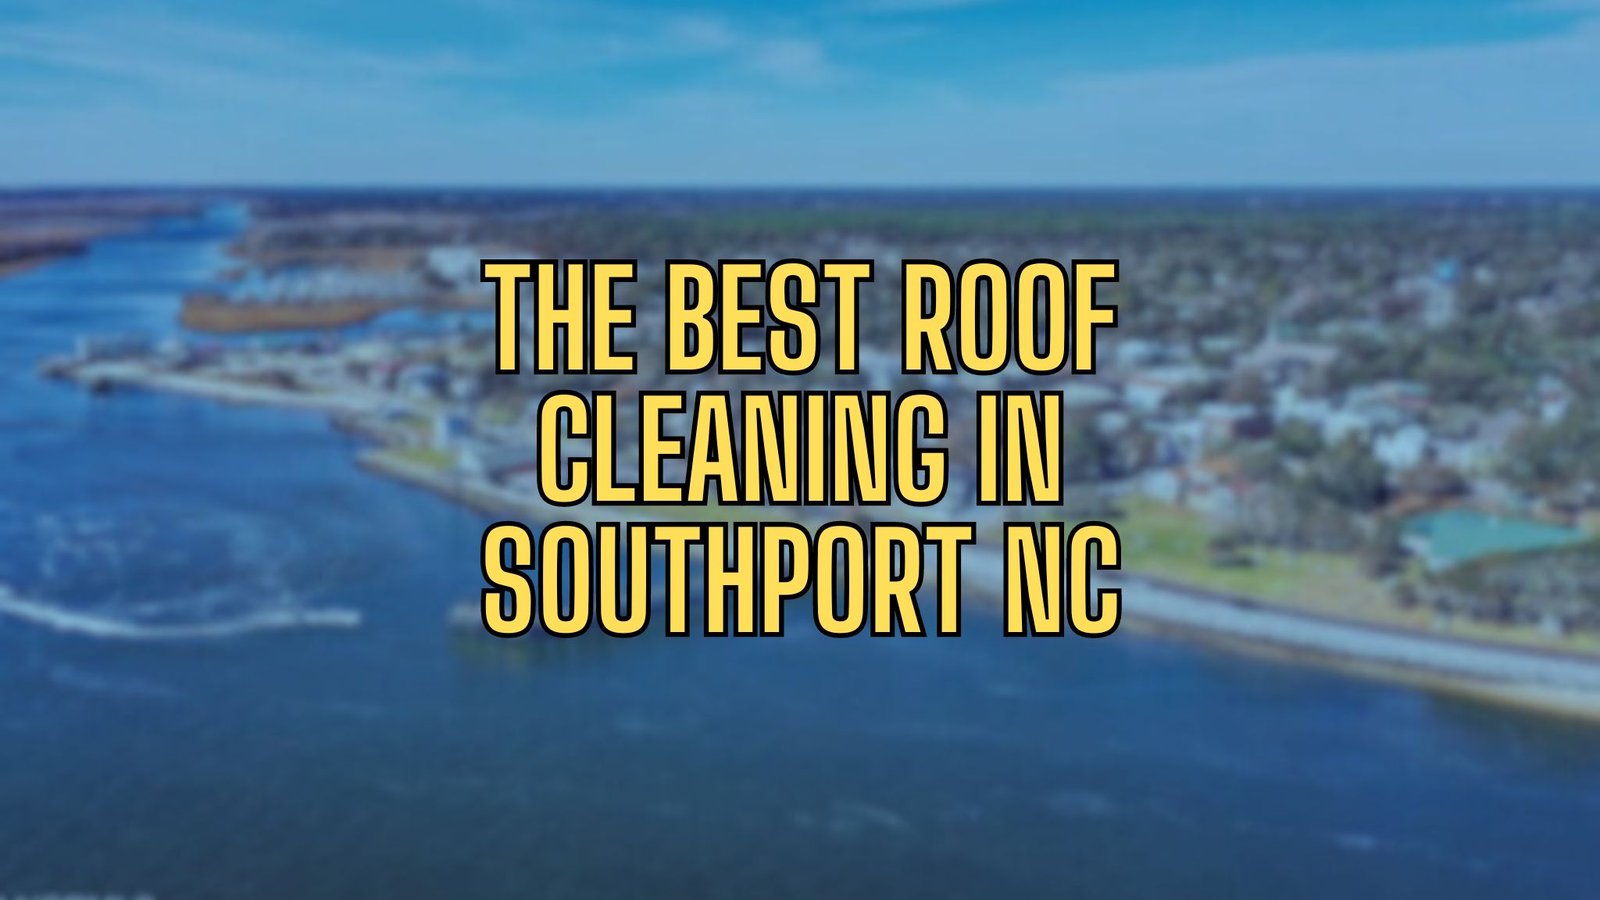 best roof cleaning southport nc